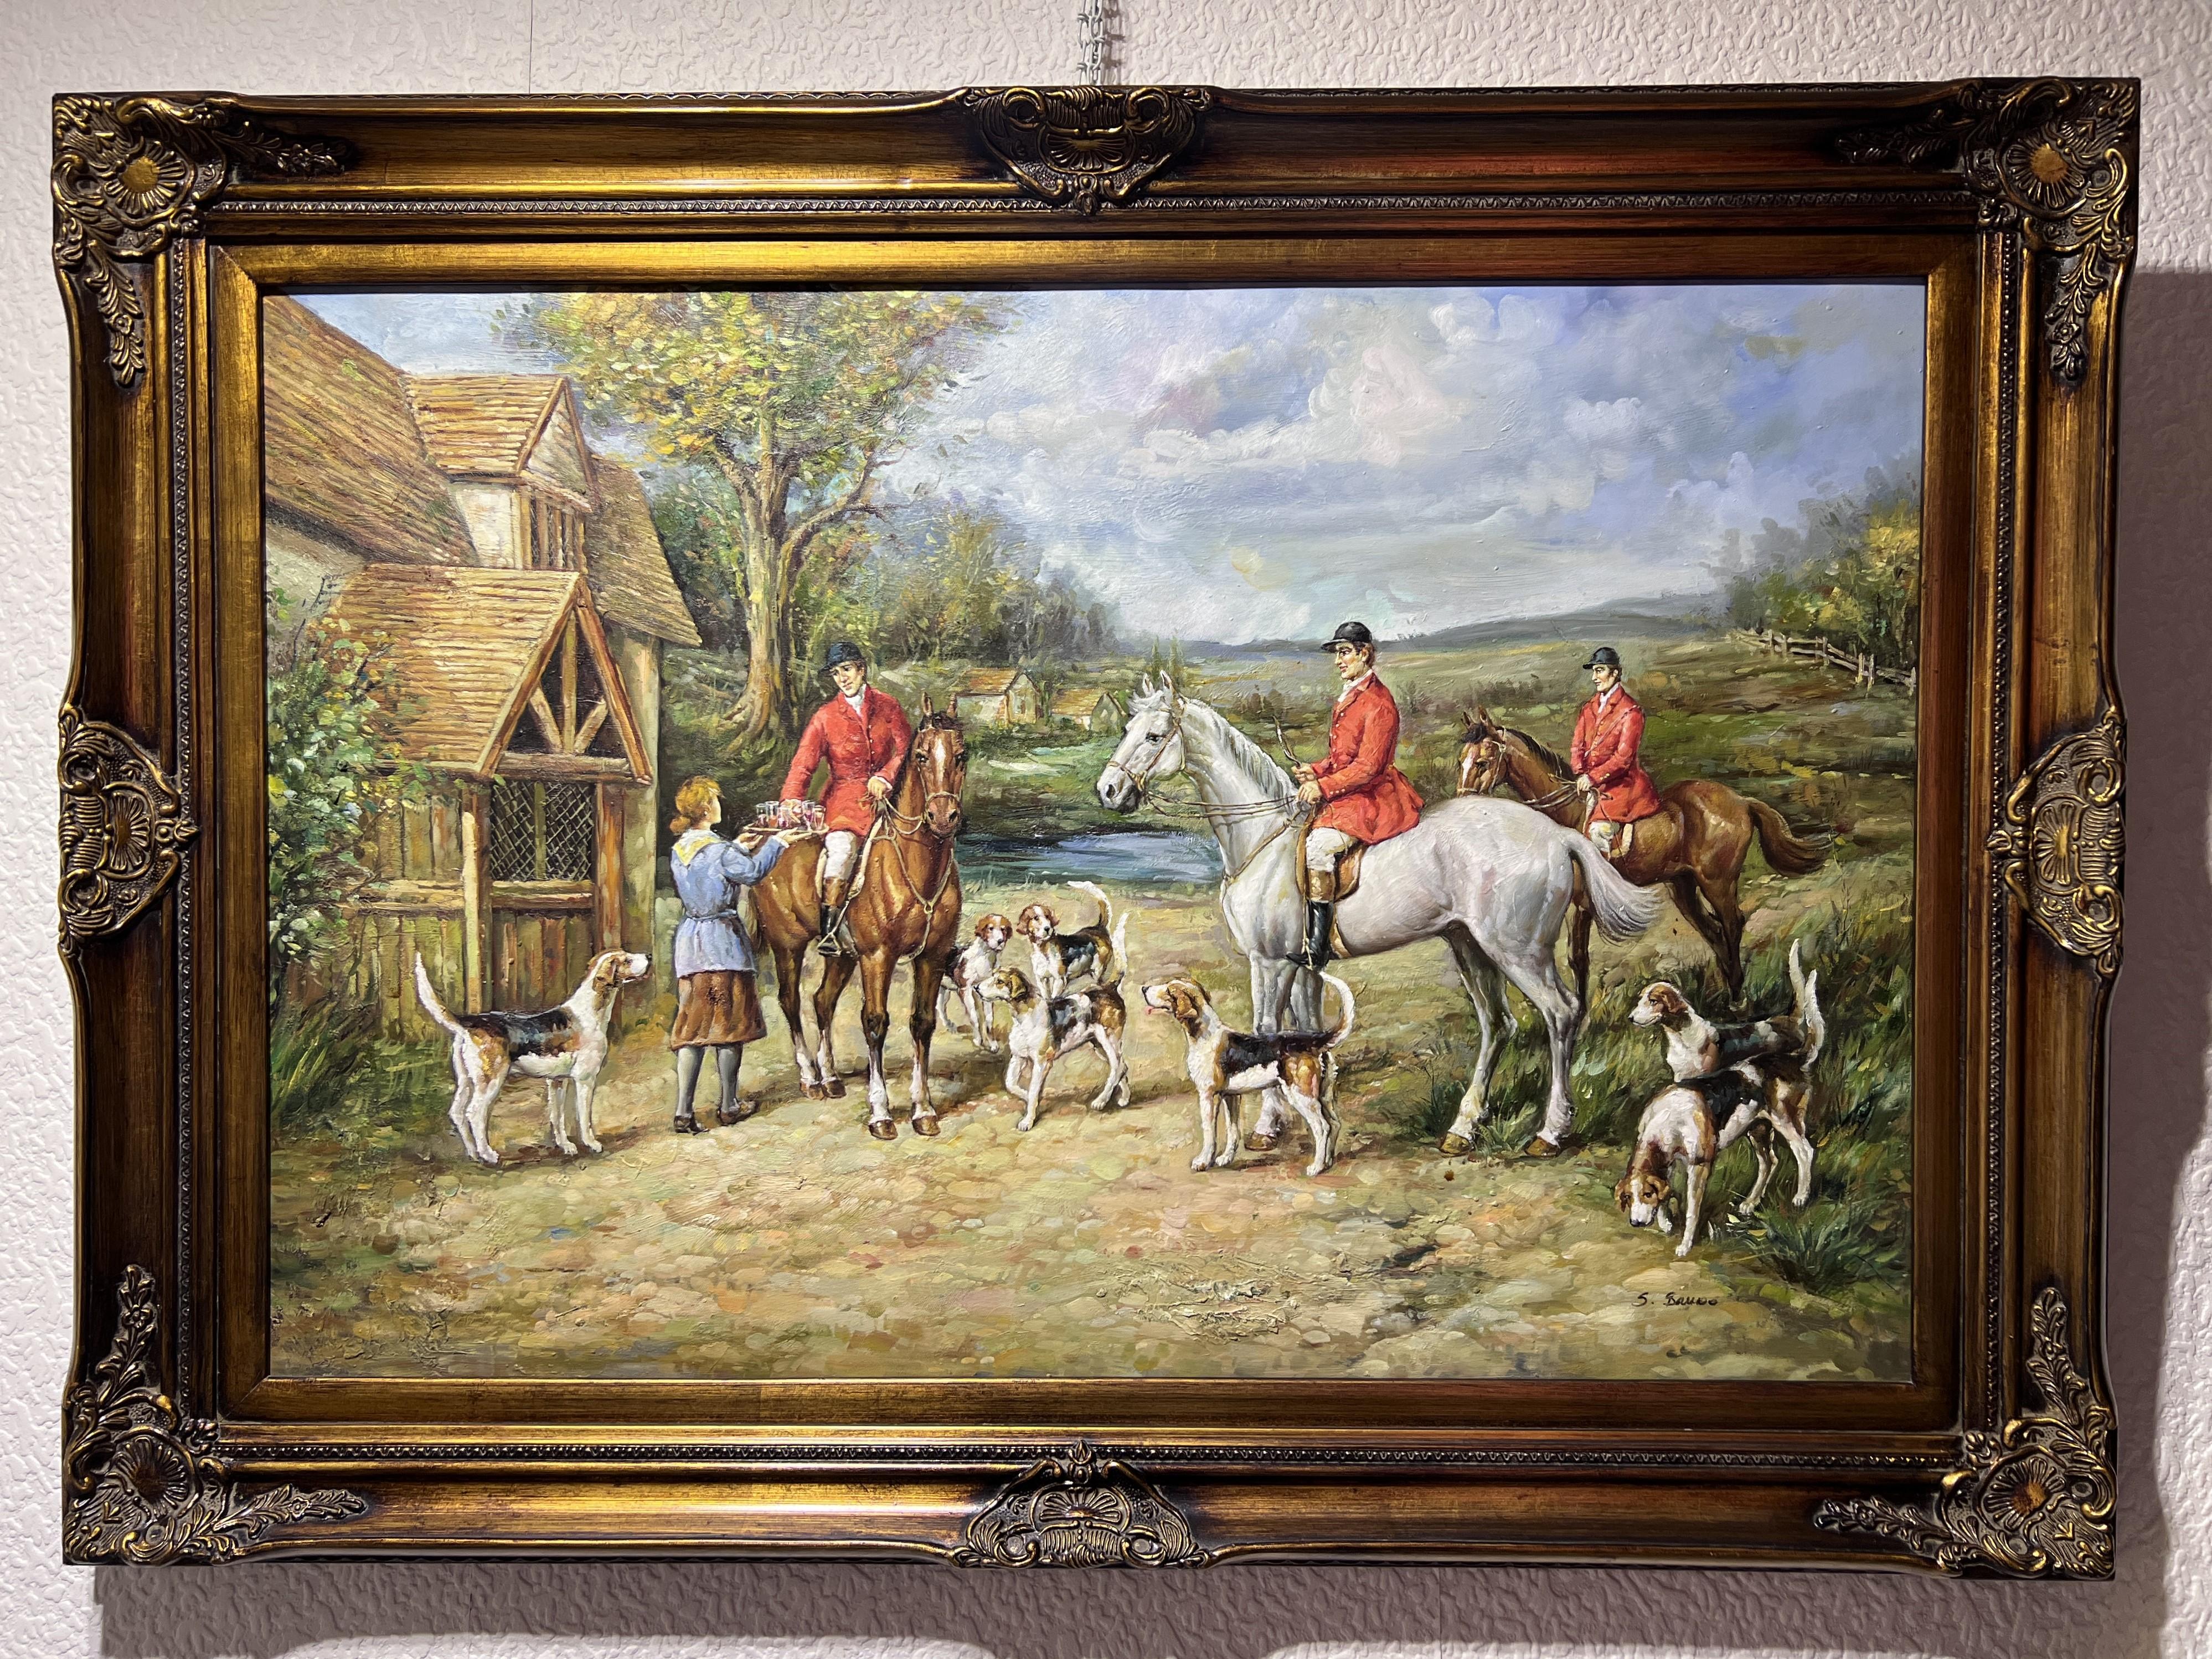 Up for sale is this large original oil painting on canvas depicting a vibrant and lively equestrian scene, likely set in the English countryside. The focal point is a group of three riders, each clad in traditional red hunting jackets, seated on